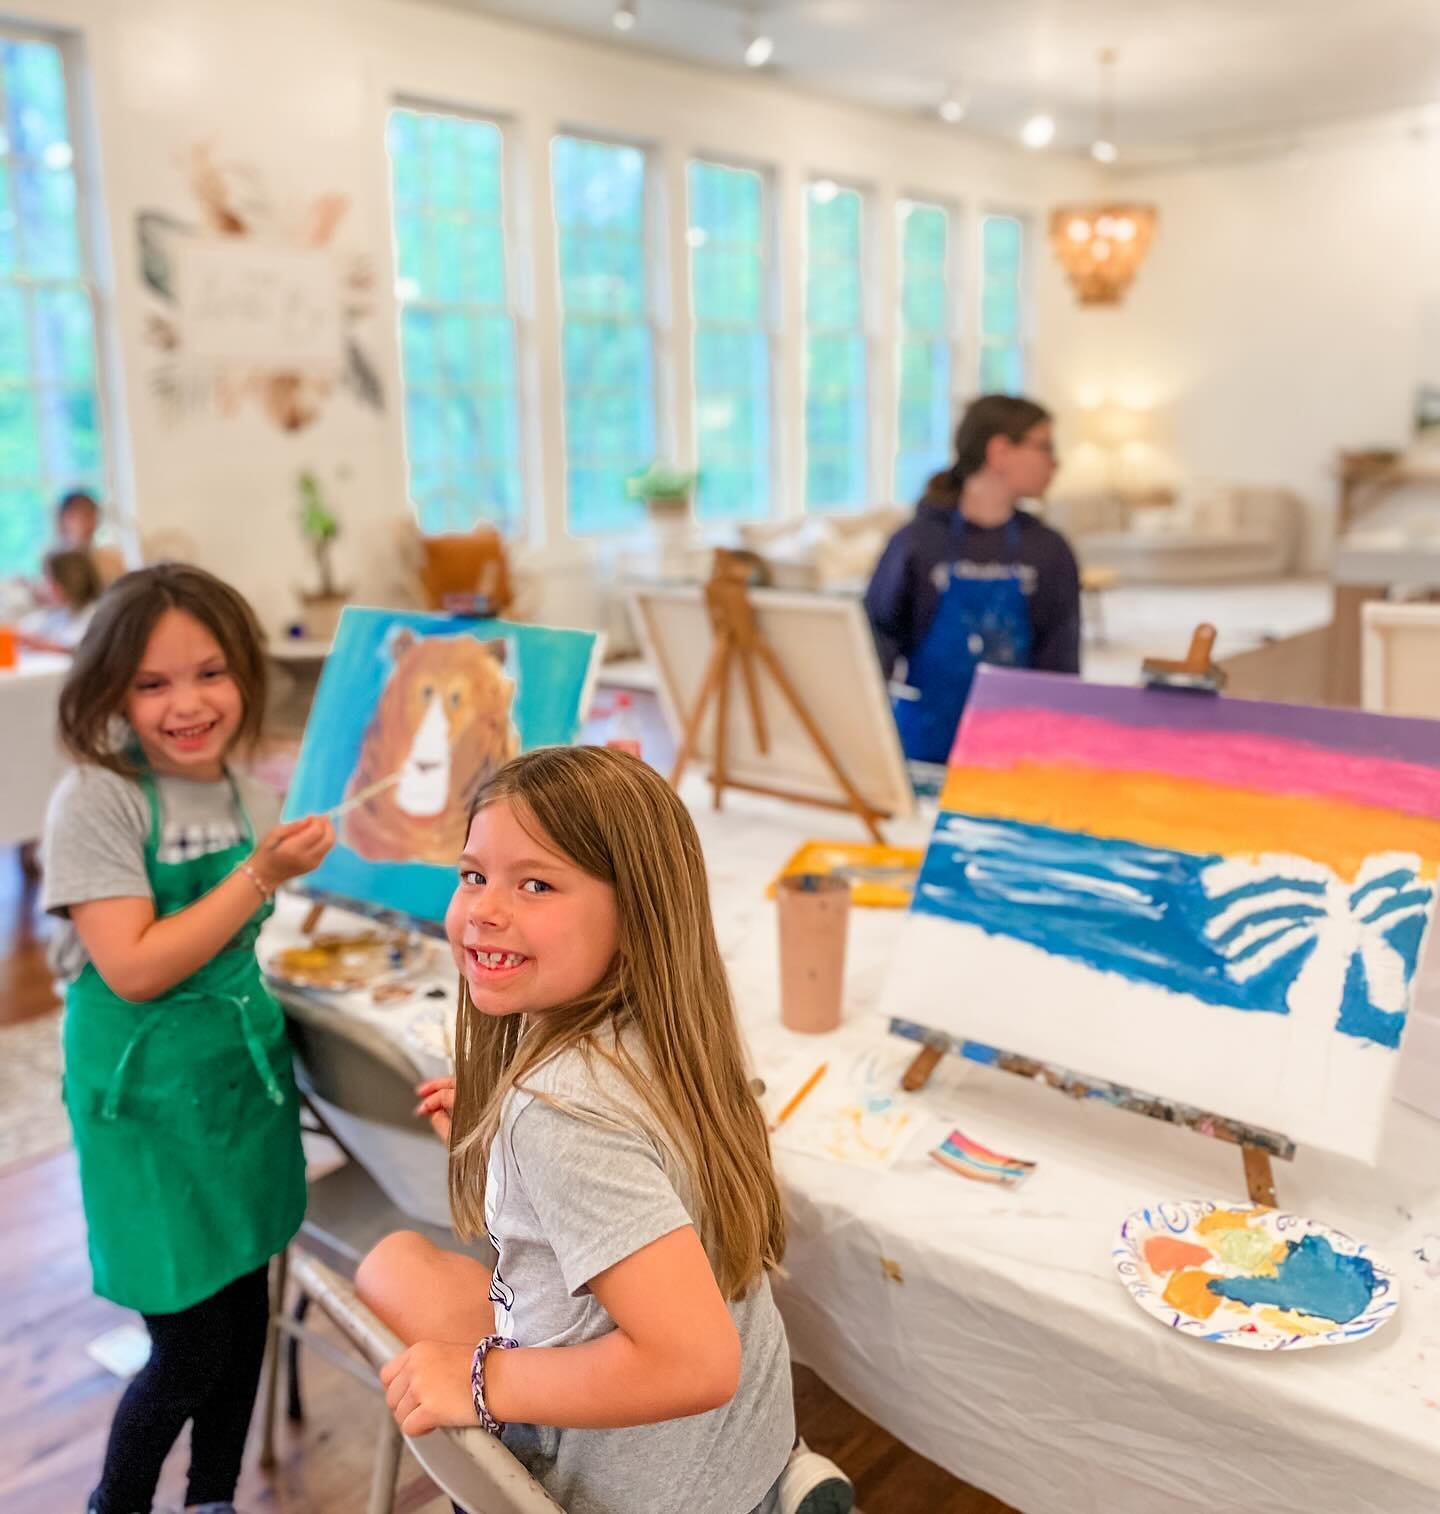 SUMMER CLASSES 🏖️ Get your child ready for our new summer Art classes beginning June 5th!! Sign up online and let them experience watercolor, acrylic, liquid pour, clay, and charcoal mediums! Ages 6-14. Link in bio☀️